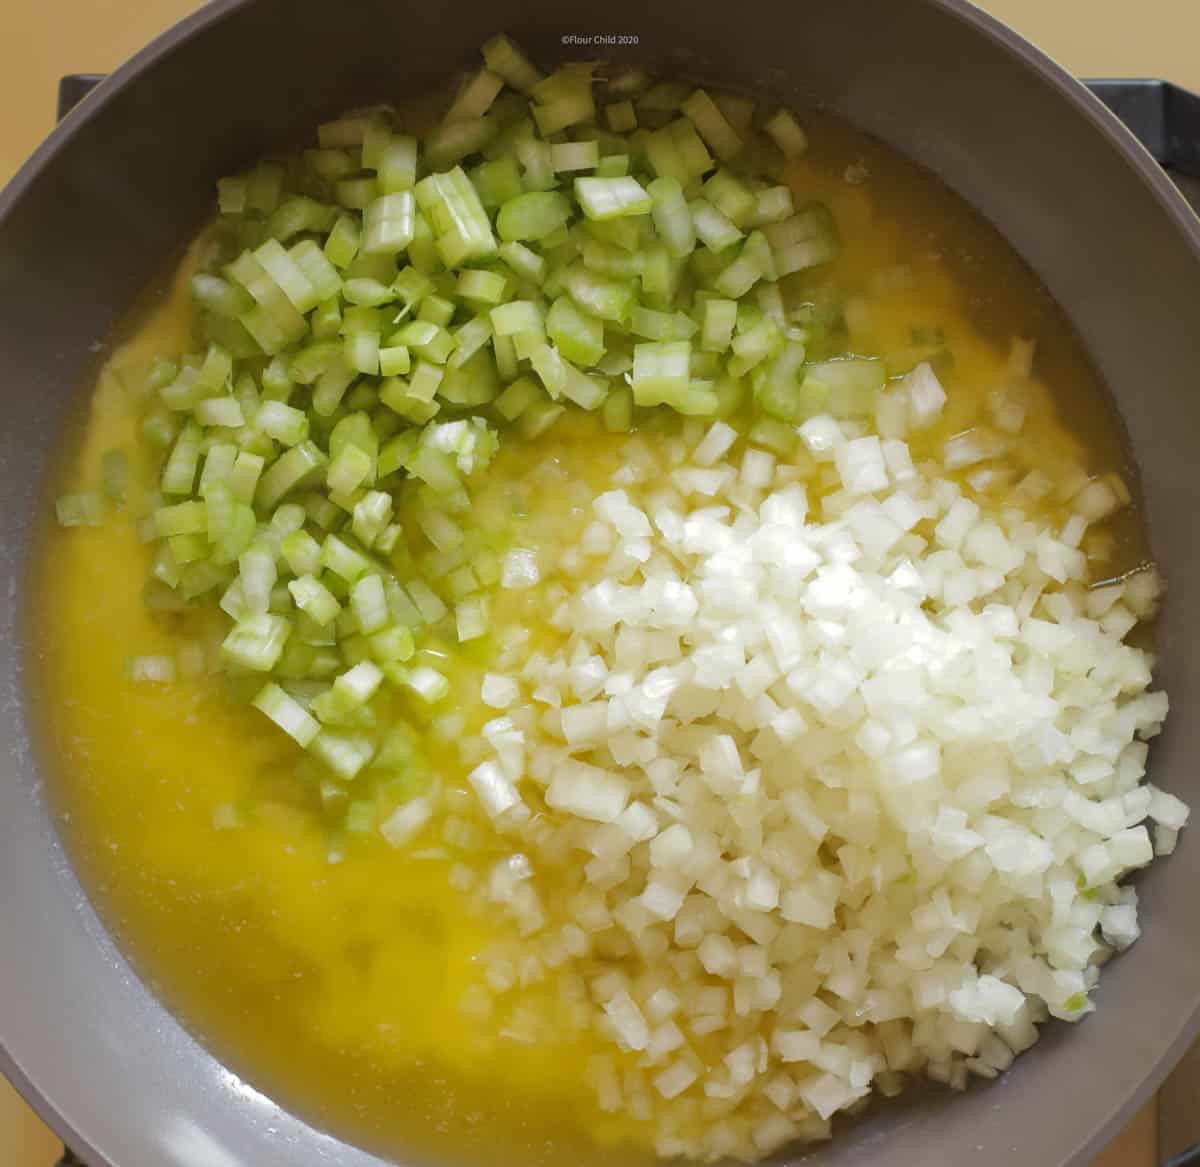 celery and onion added to butter in skillet